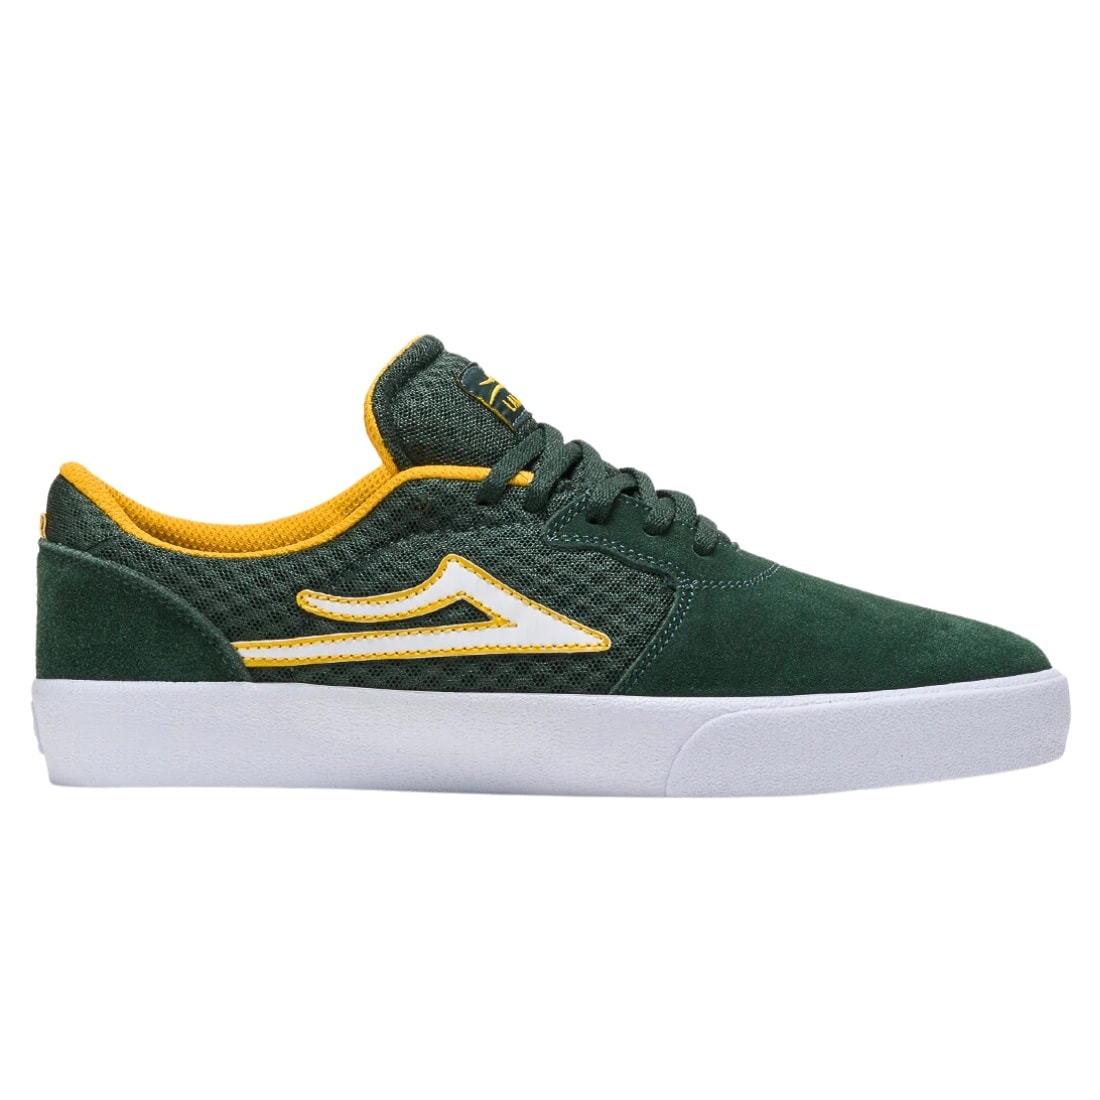 Lakai Cardiff Skate Shoes - Pine Suede - Mens Running Shoes/Trainers by Lakai